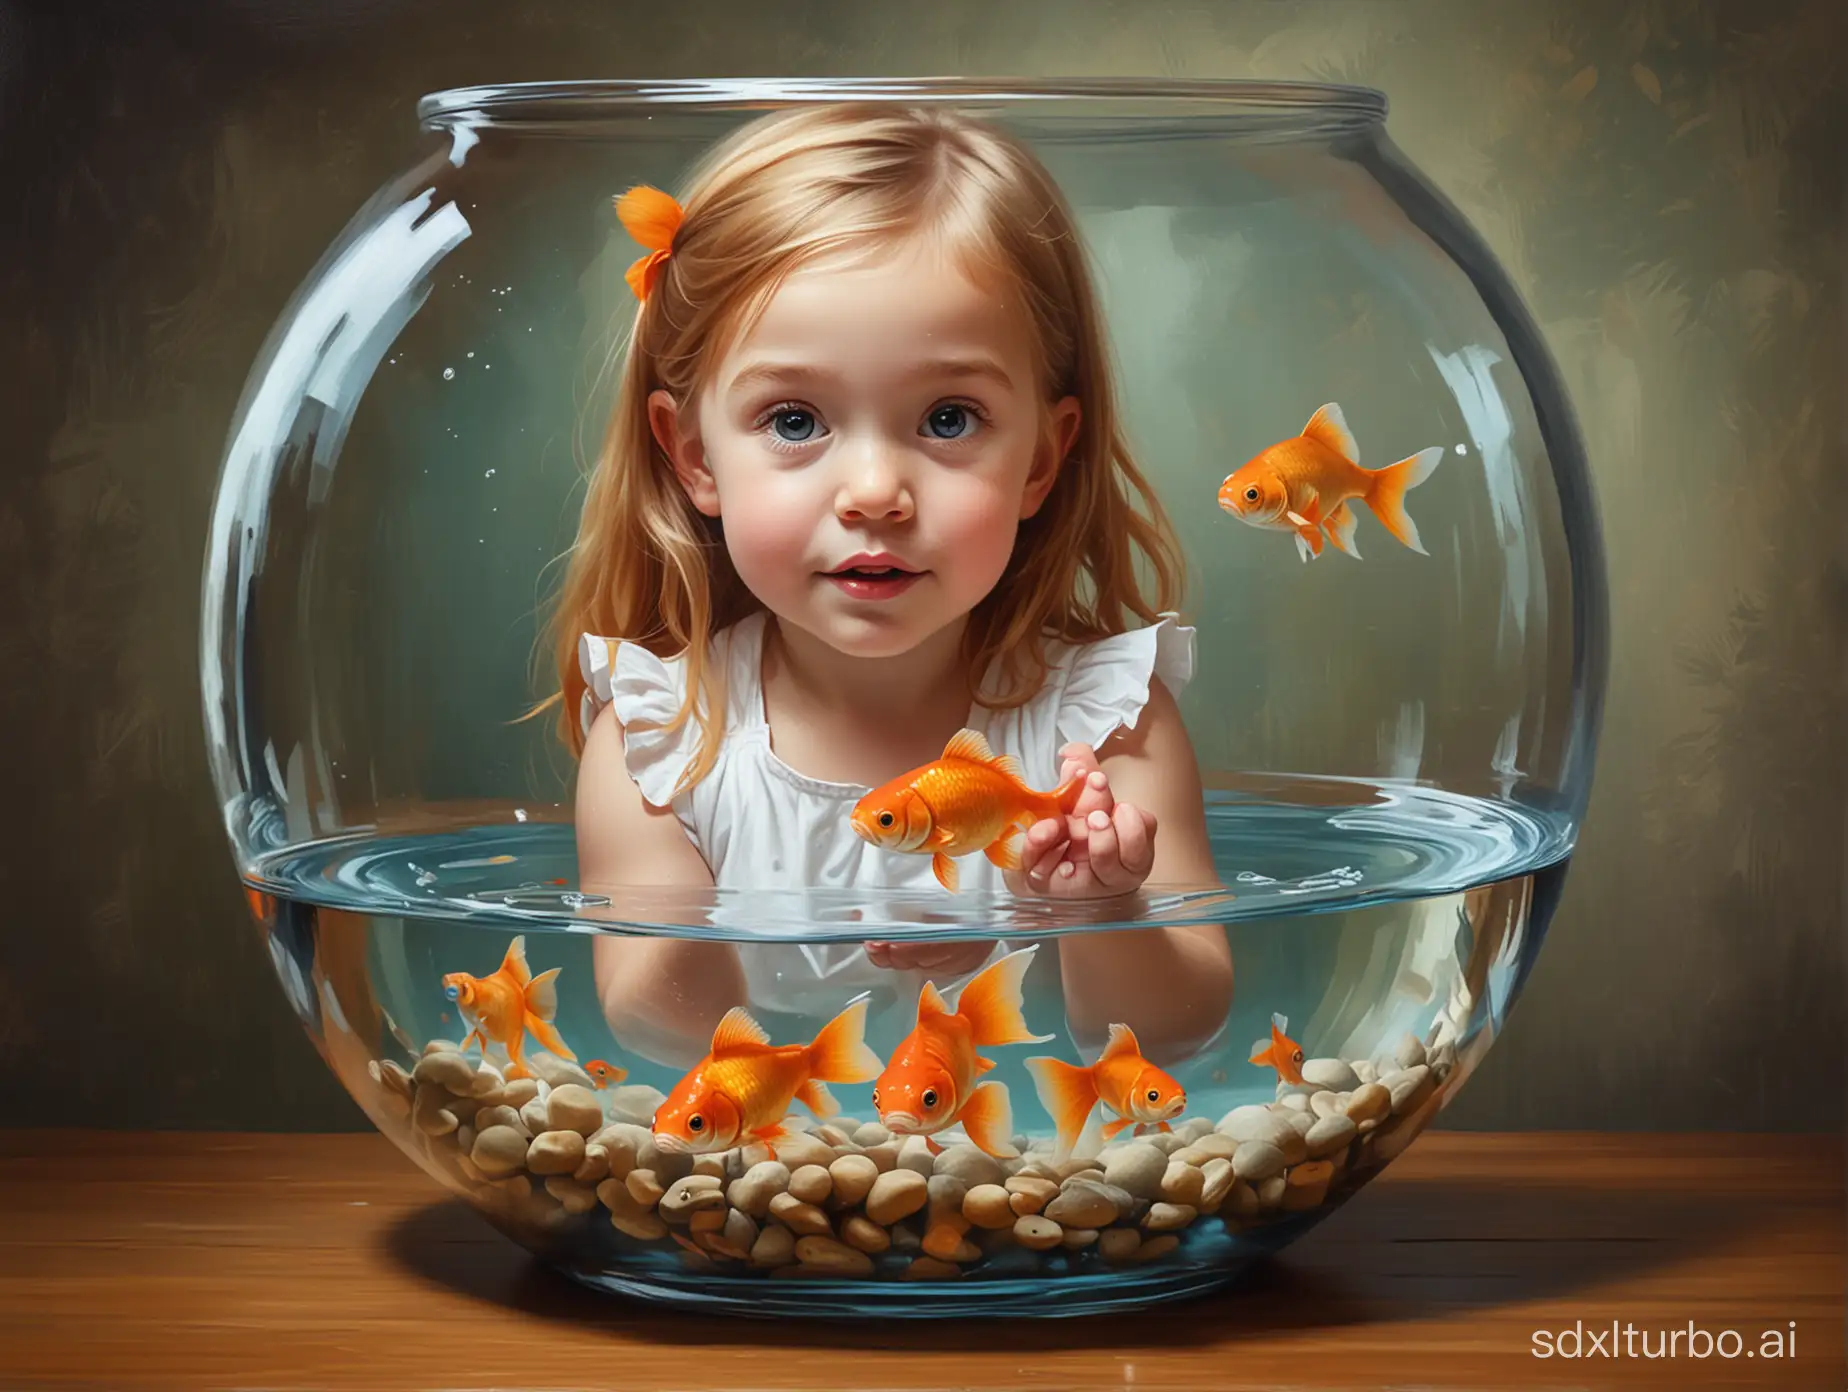 Create an image of a american little girl and her goldfish in a glass fish bowl. Oil painting style. Parody.